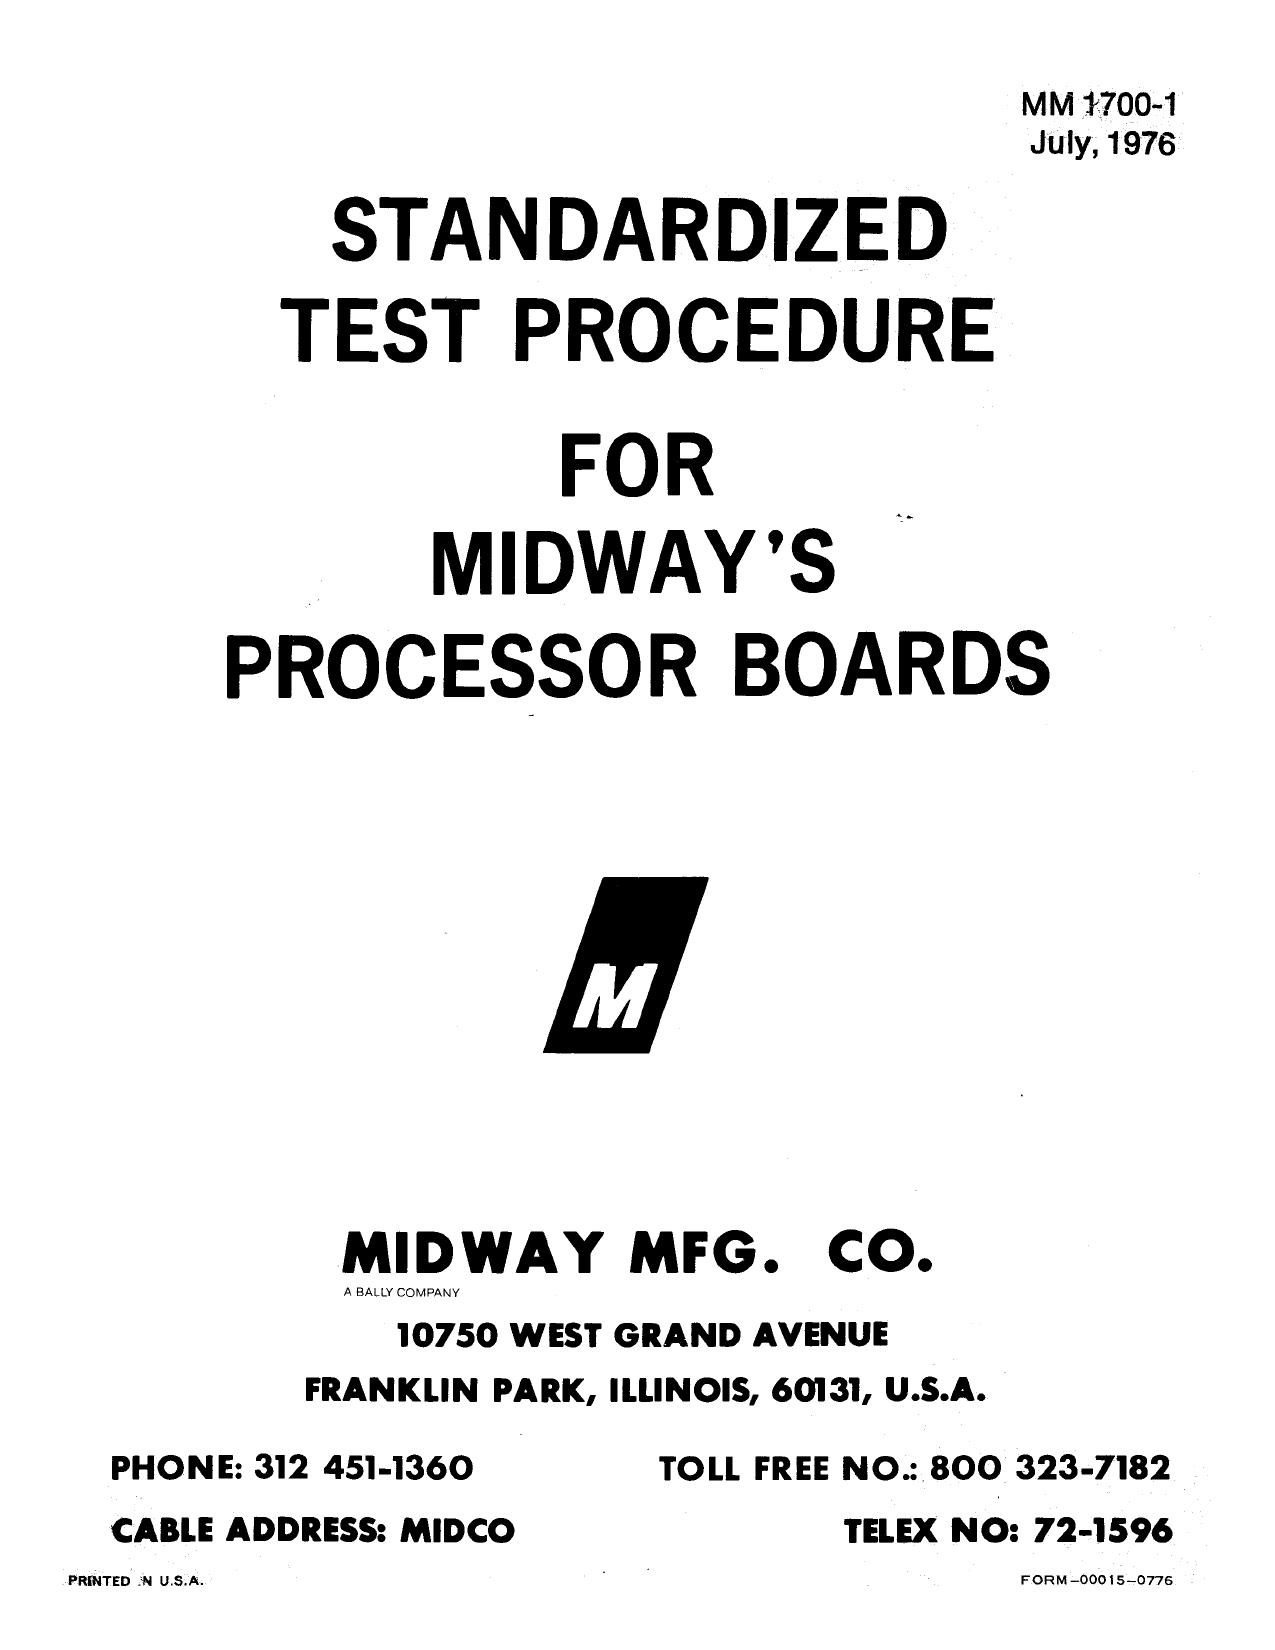 midway8080test